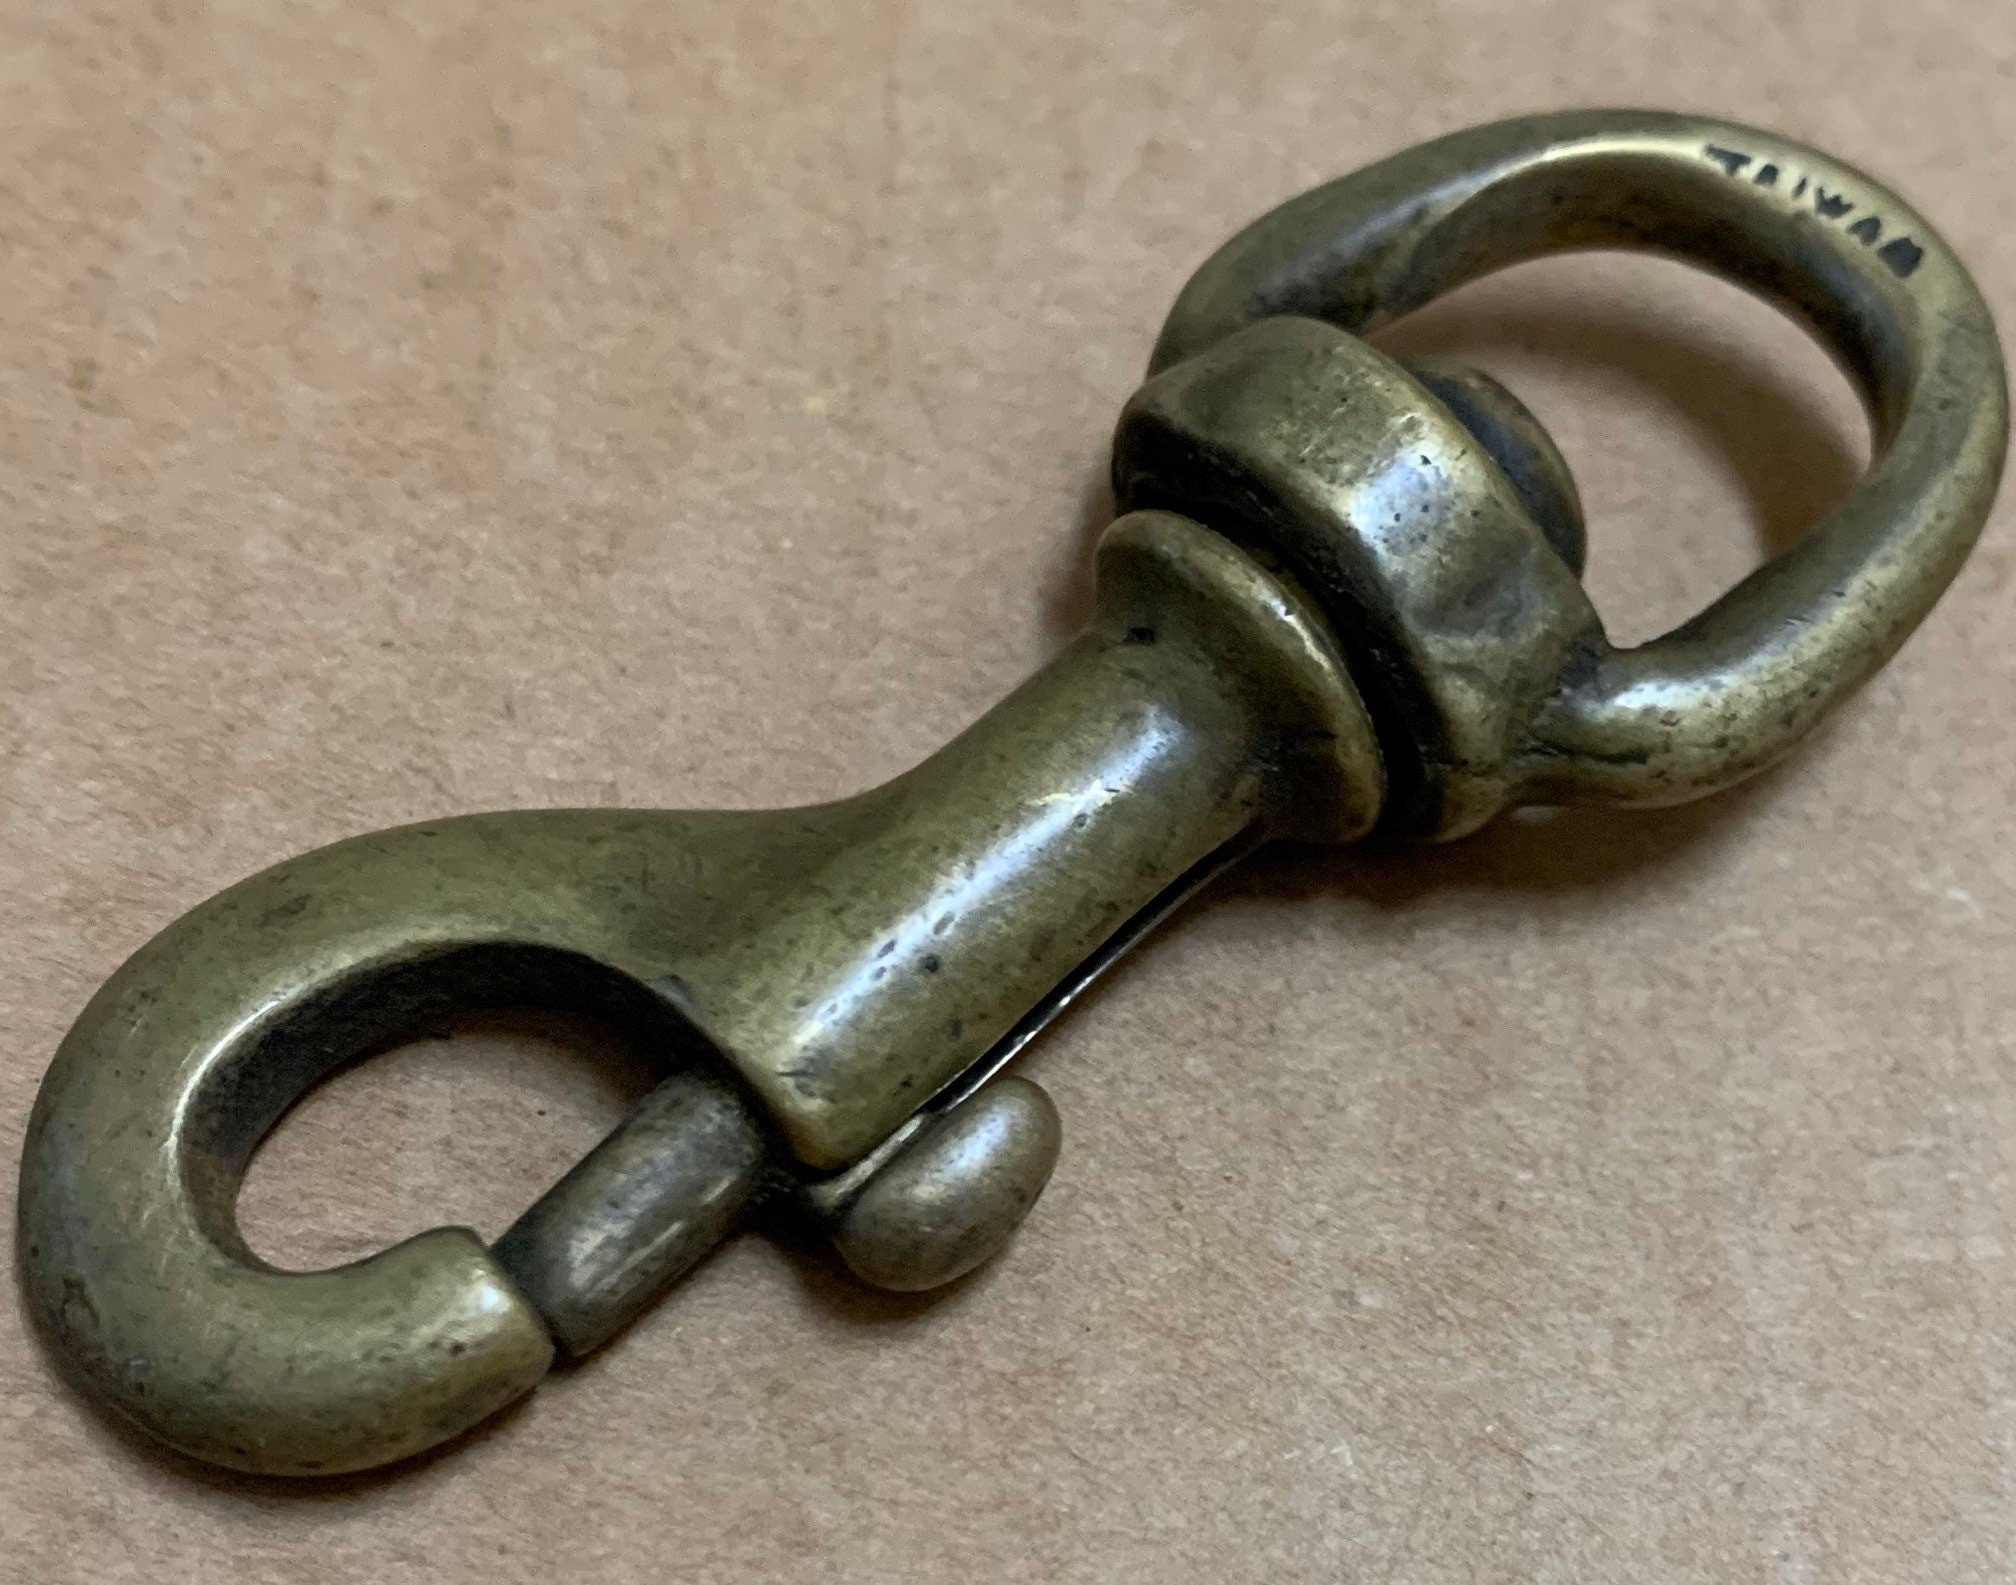 SNAP HOOK Clip SWIVEL True Solid Brass Vintage Maritime Farmhouse Hardware  Spring Loaded Trigger Halyard Nice Patina 3 1/4 Nautical Stable -  Hong  Kong